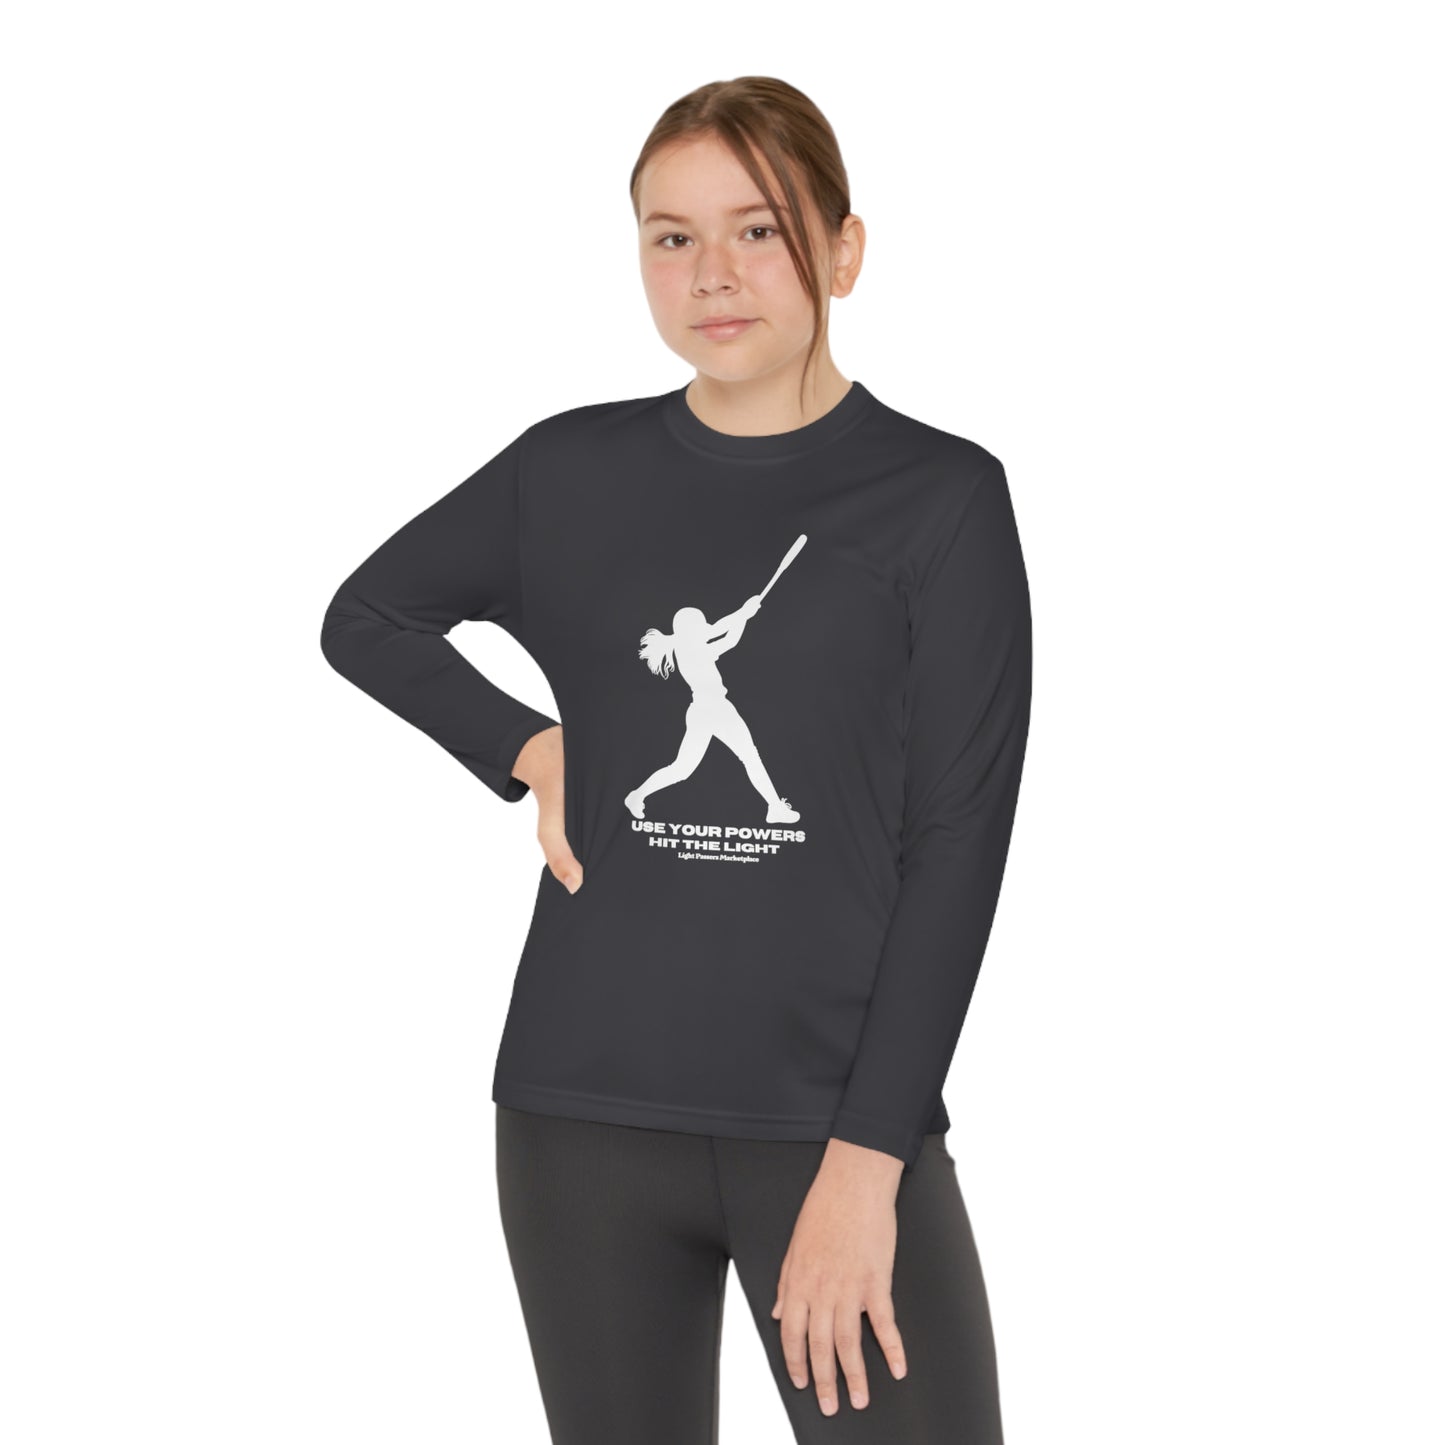 A youth long sleeve tee featuring a silhouette of a girl swinging a bat. Made of 100% moisture-wicking polyester with an athletic fit for active kids. Lightweight, breathable, and stylish.